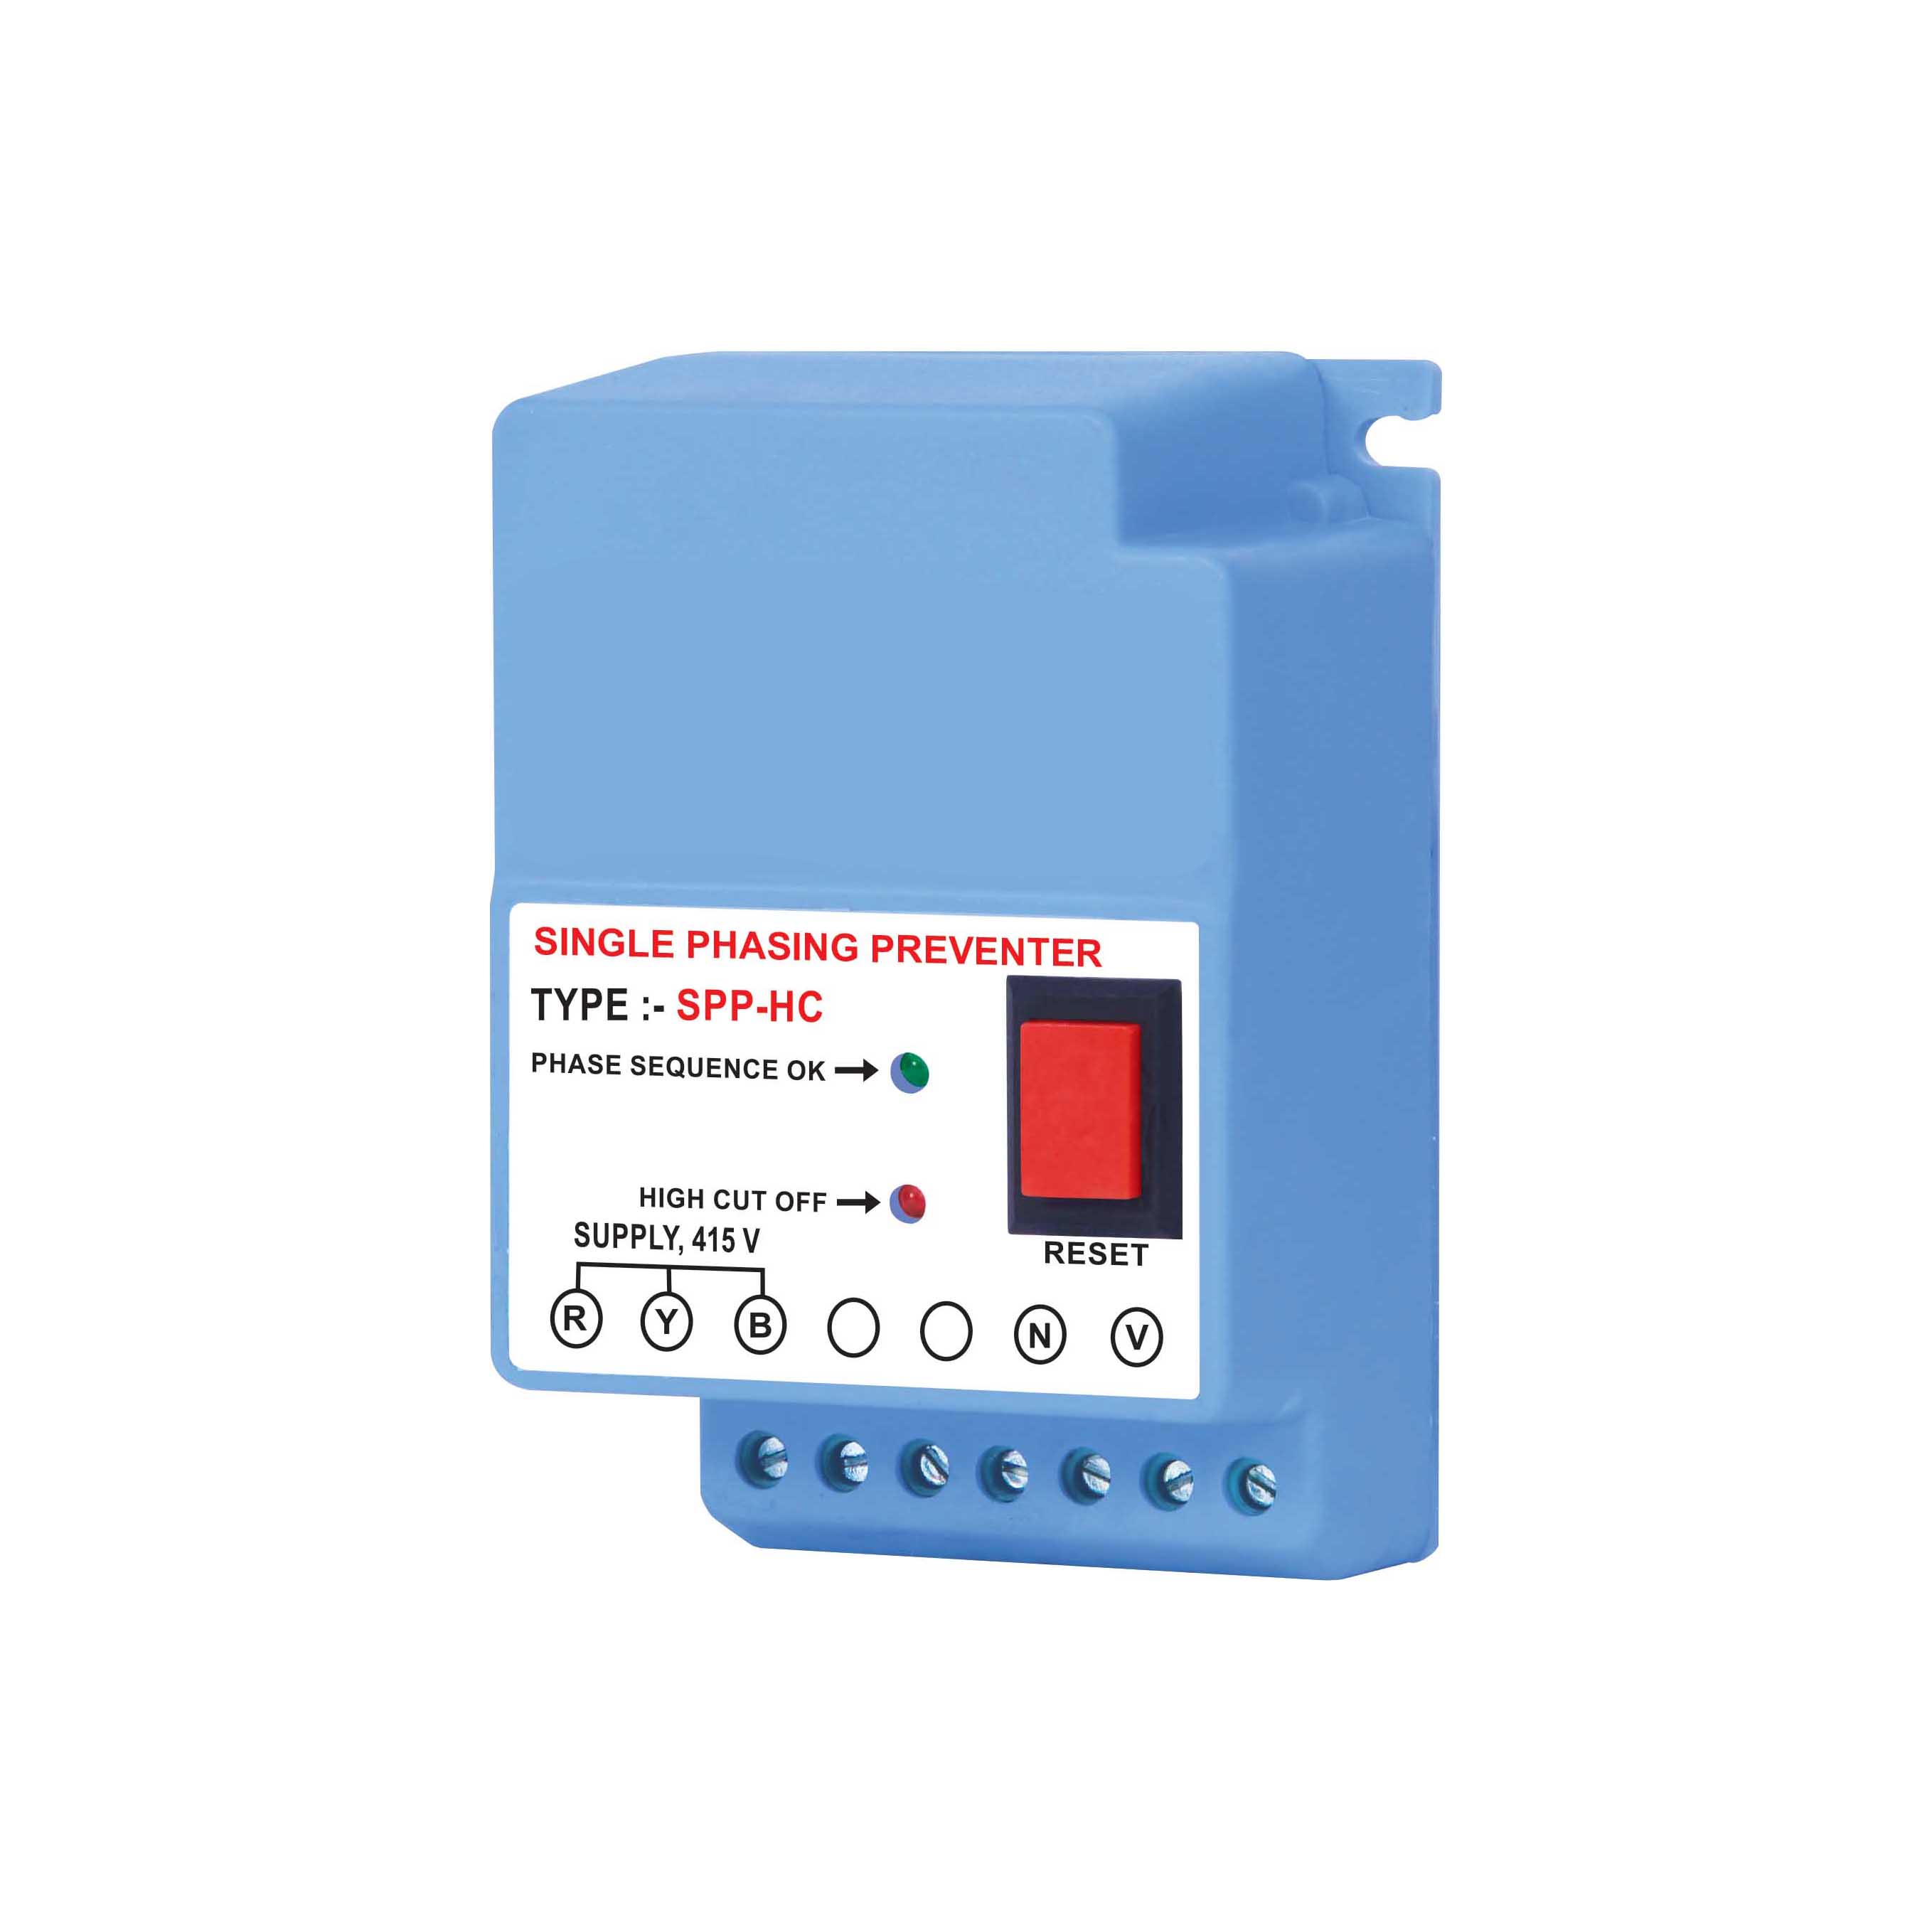 SPP HL Single Phasing Preventer for three phase panel with high voltage protection and reset button provided